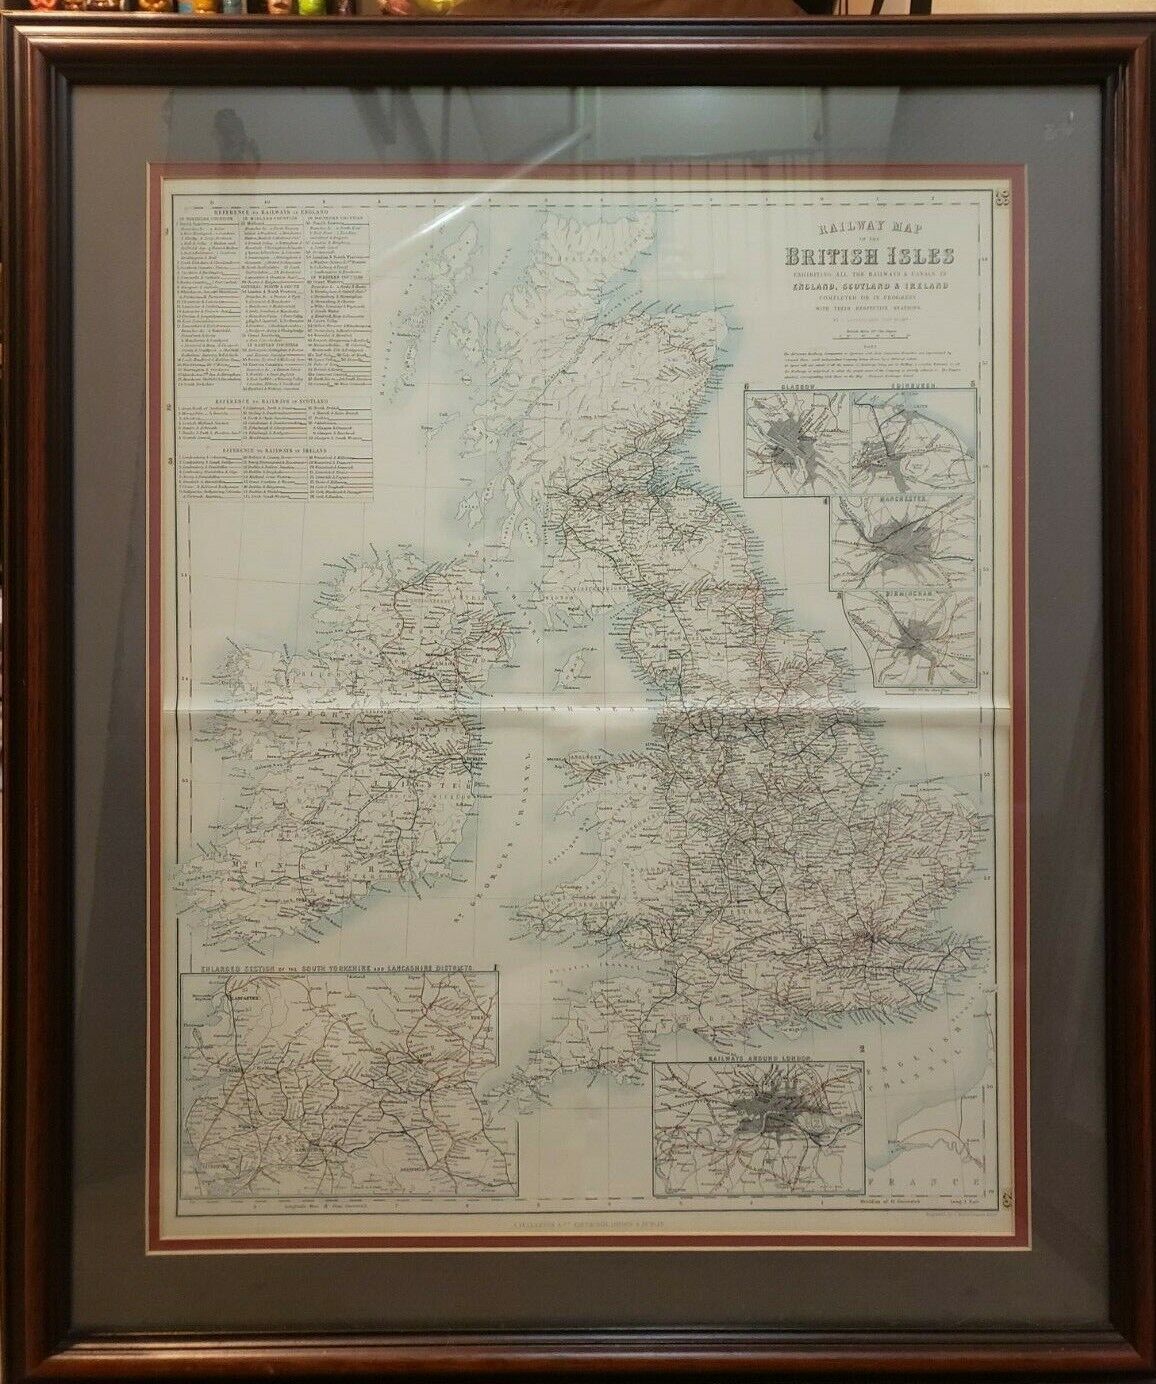 Vintage 19th Century British Isles Railway Map Framed and Matted 17\